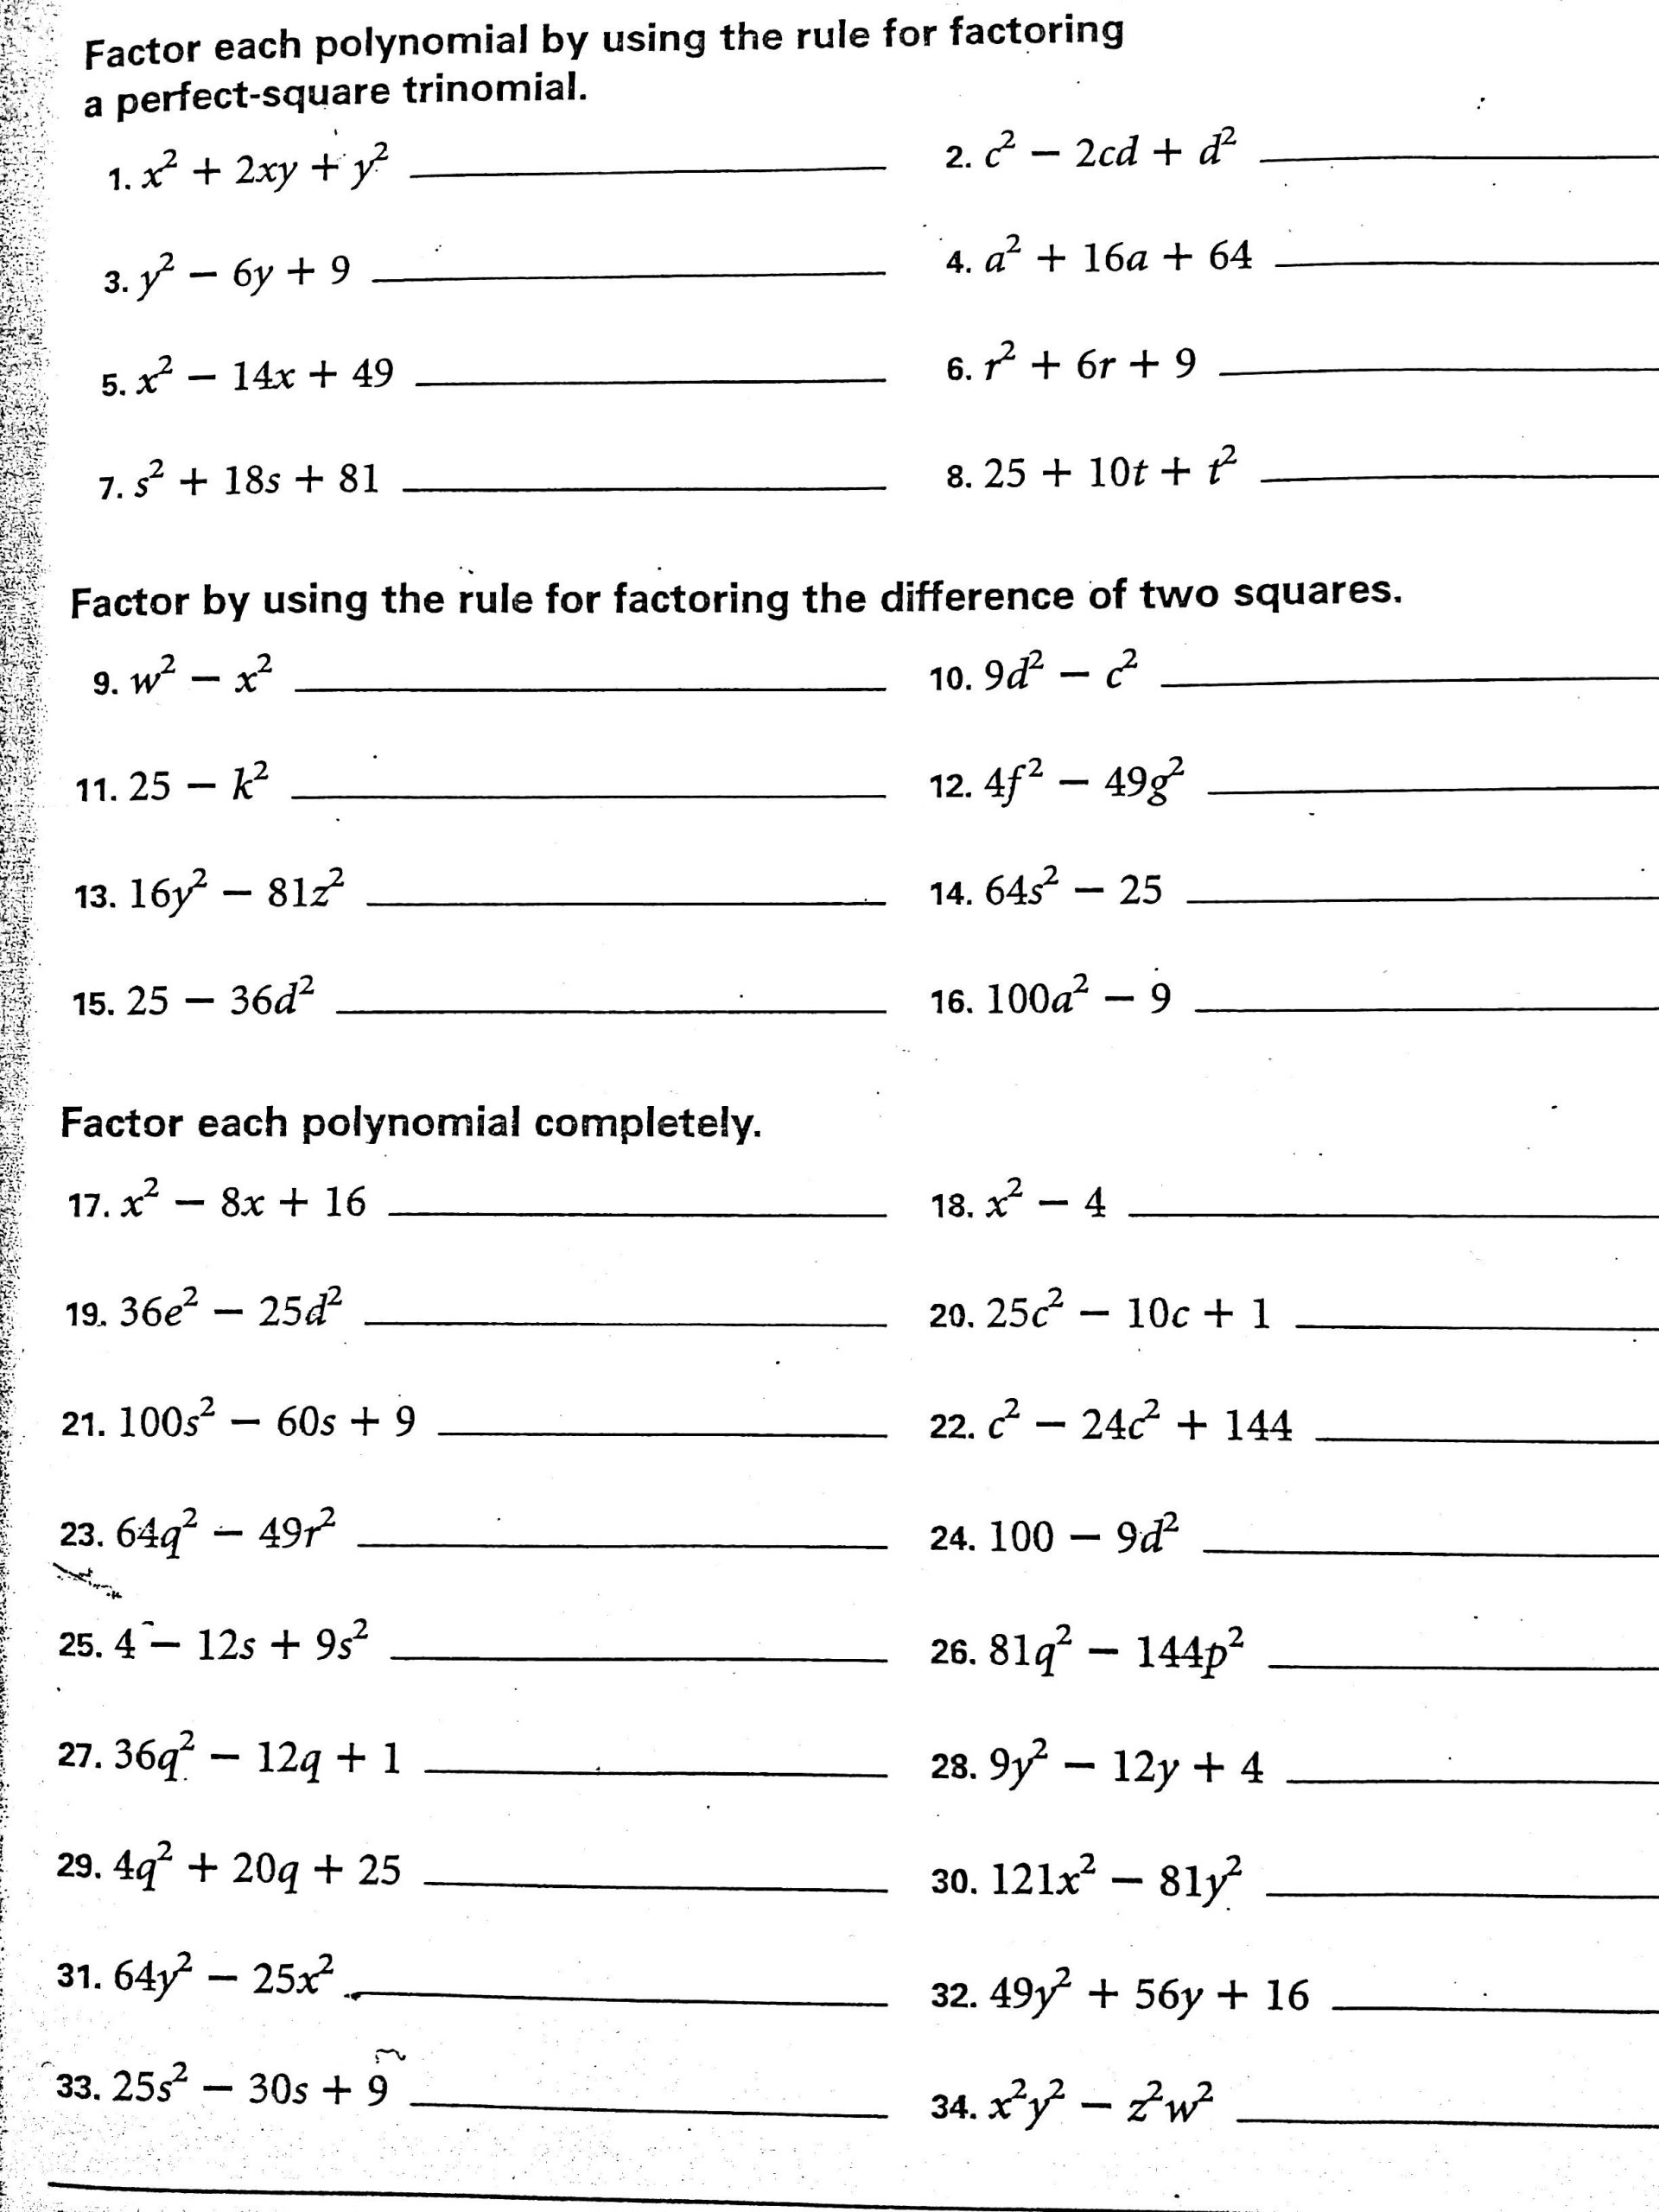 Factoring Difference Of Squares Worksheet Week Of 10 15 10 19 Swenson Math